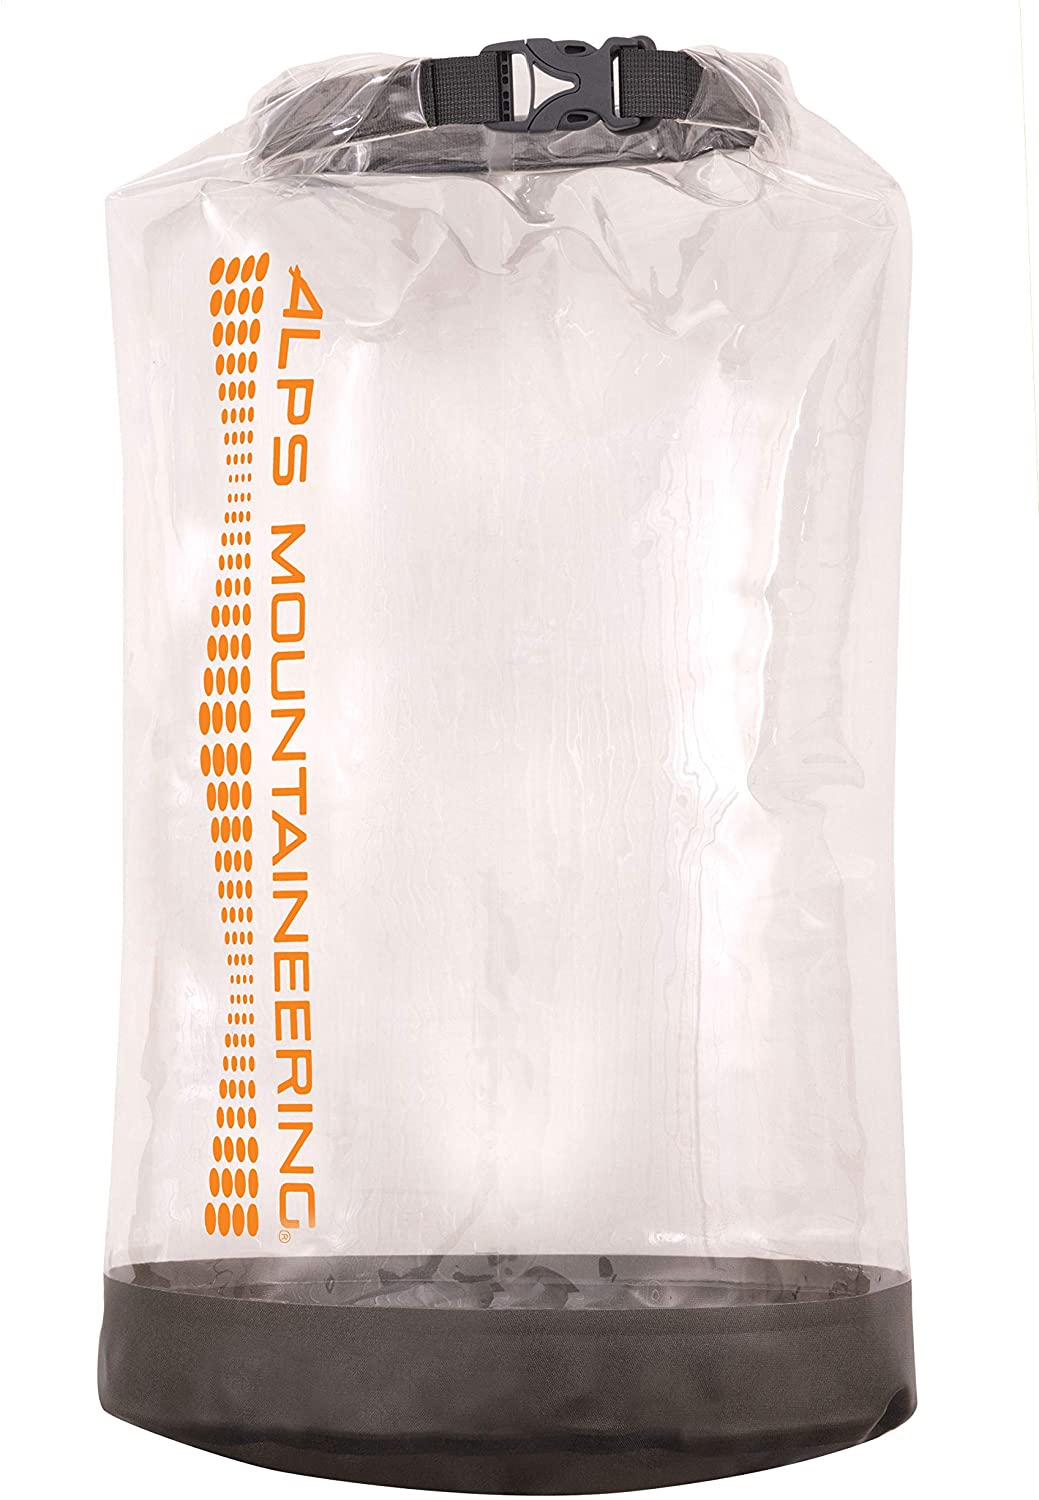 ALPS Mountaineering Clear Passage Dry Bag, 35L - AL7464000